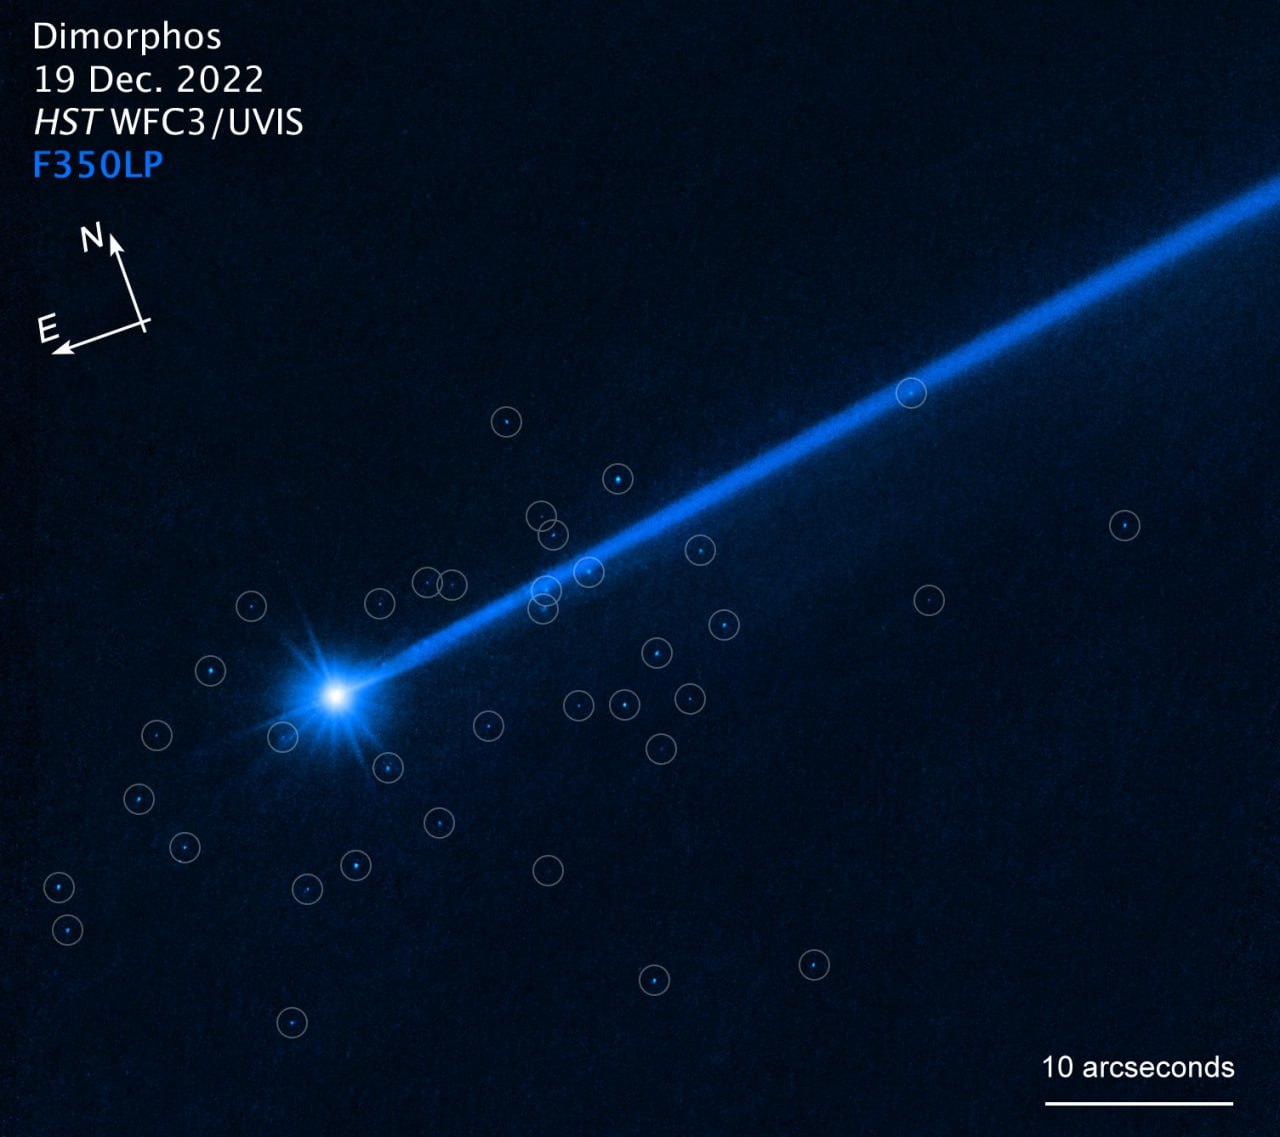 Hubble discovers 37 boulders near Dimorphos likely from DART crash